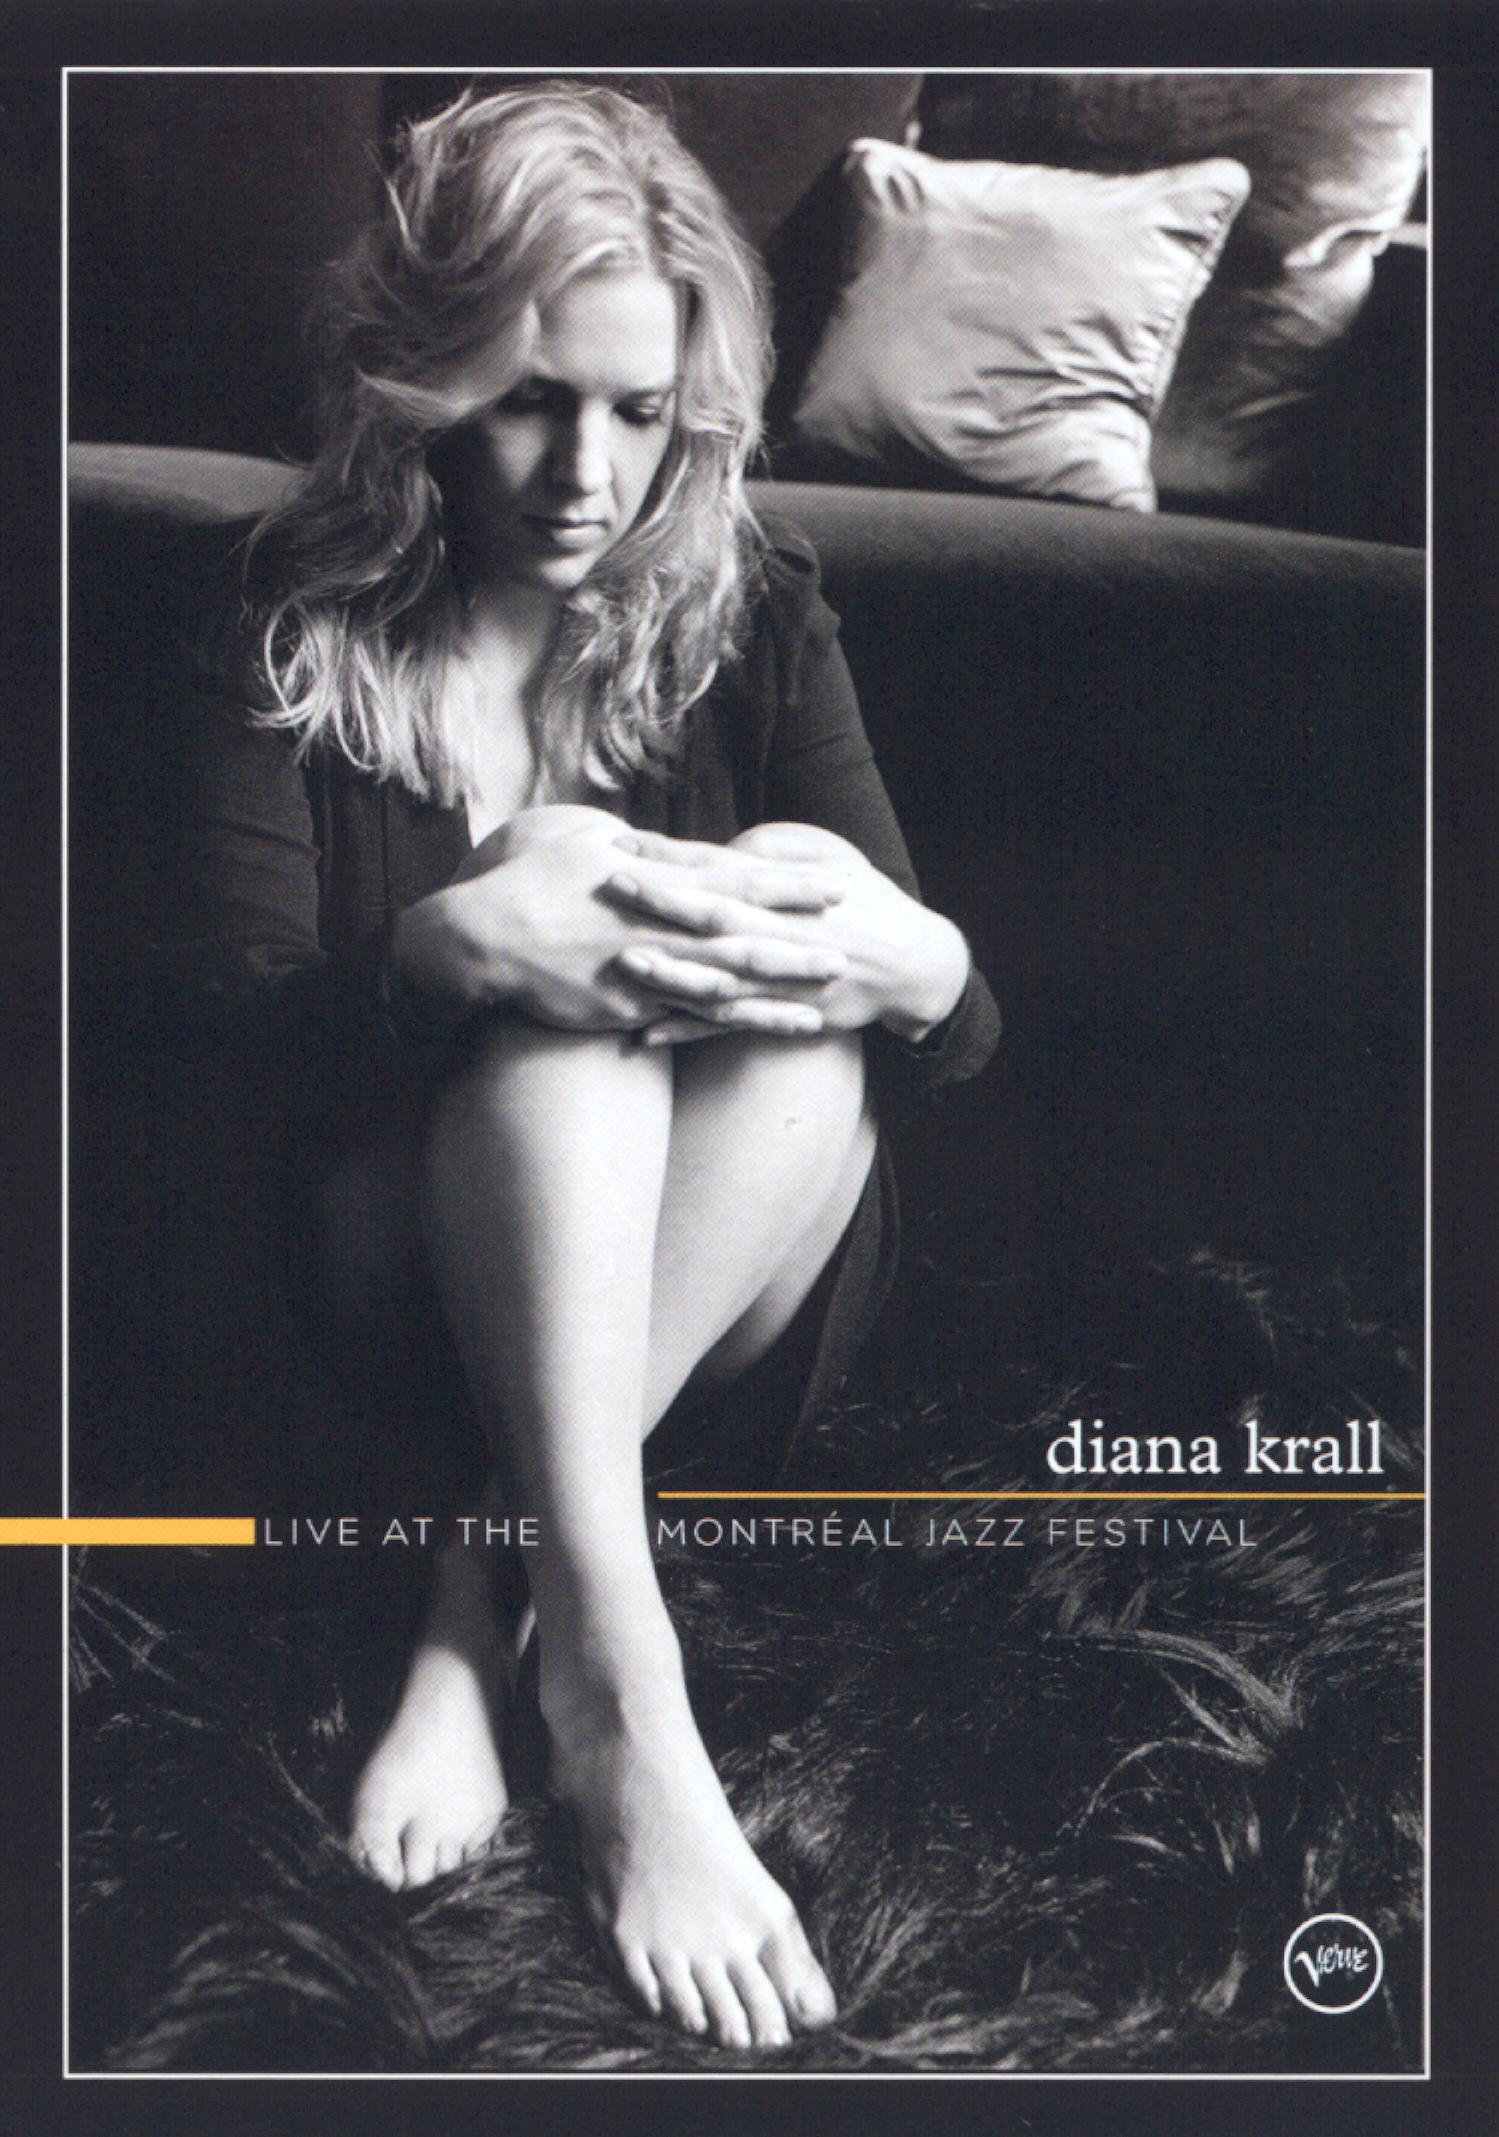 Diana Krall: Live at the Montreal Jazz Festival [DVD]